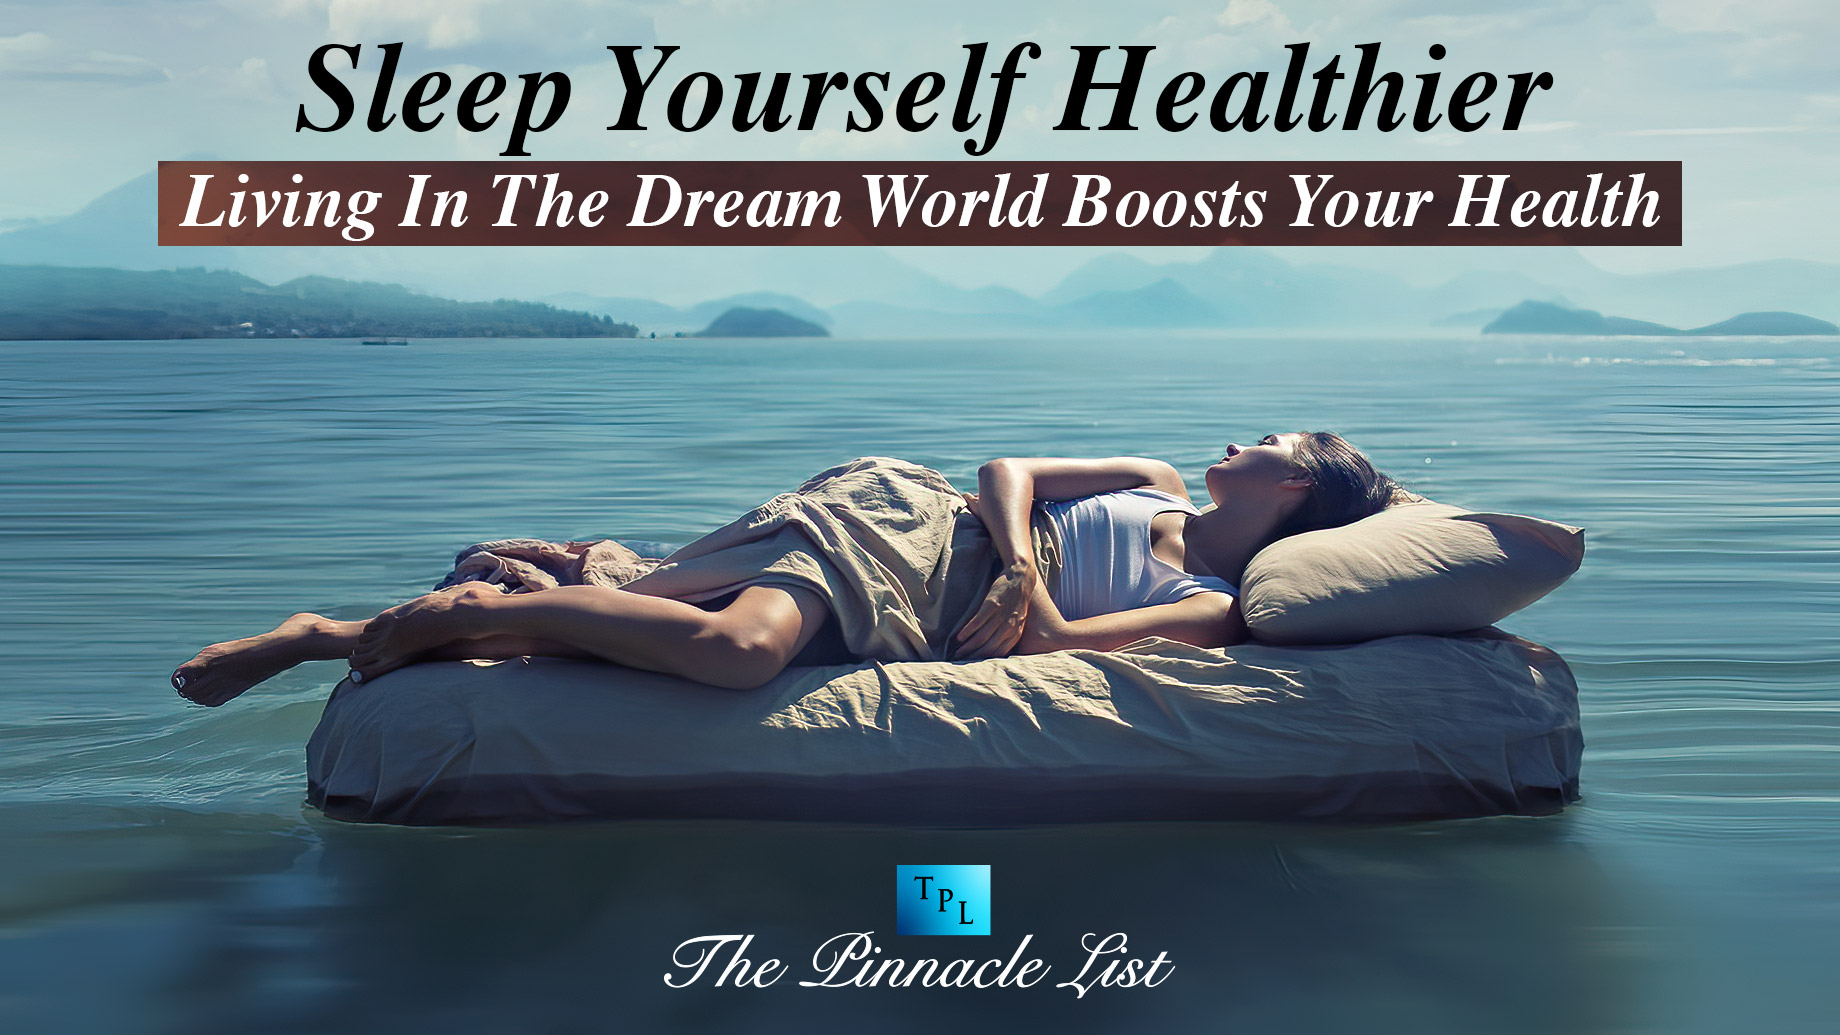 Sleep Yourself Healthier - Living In The Dream World Boosts Your Health